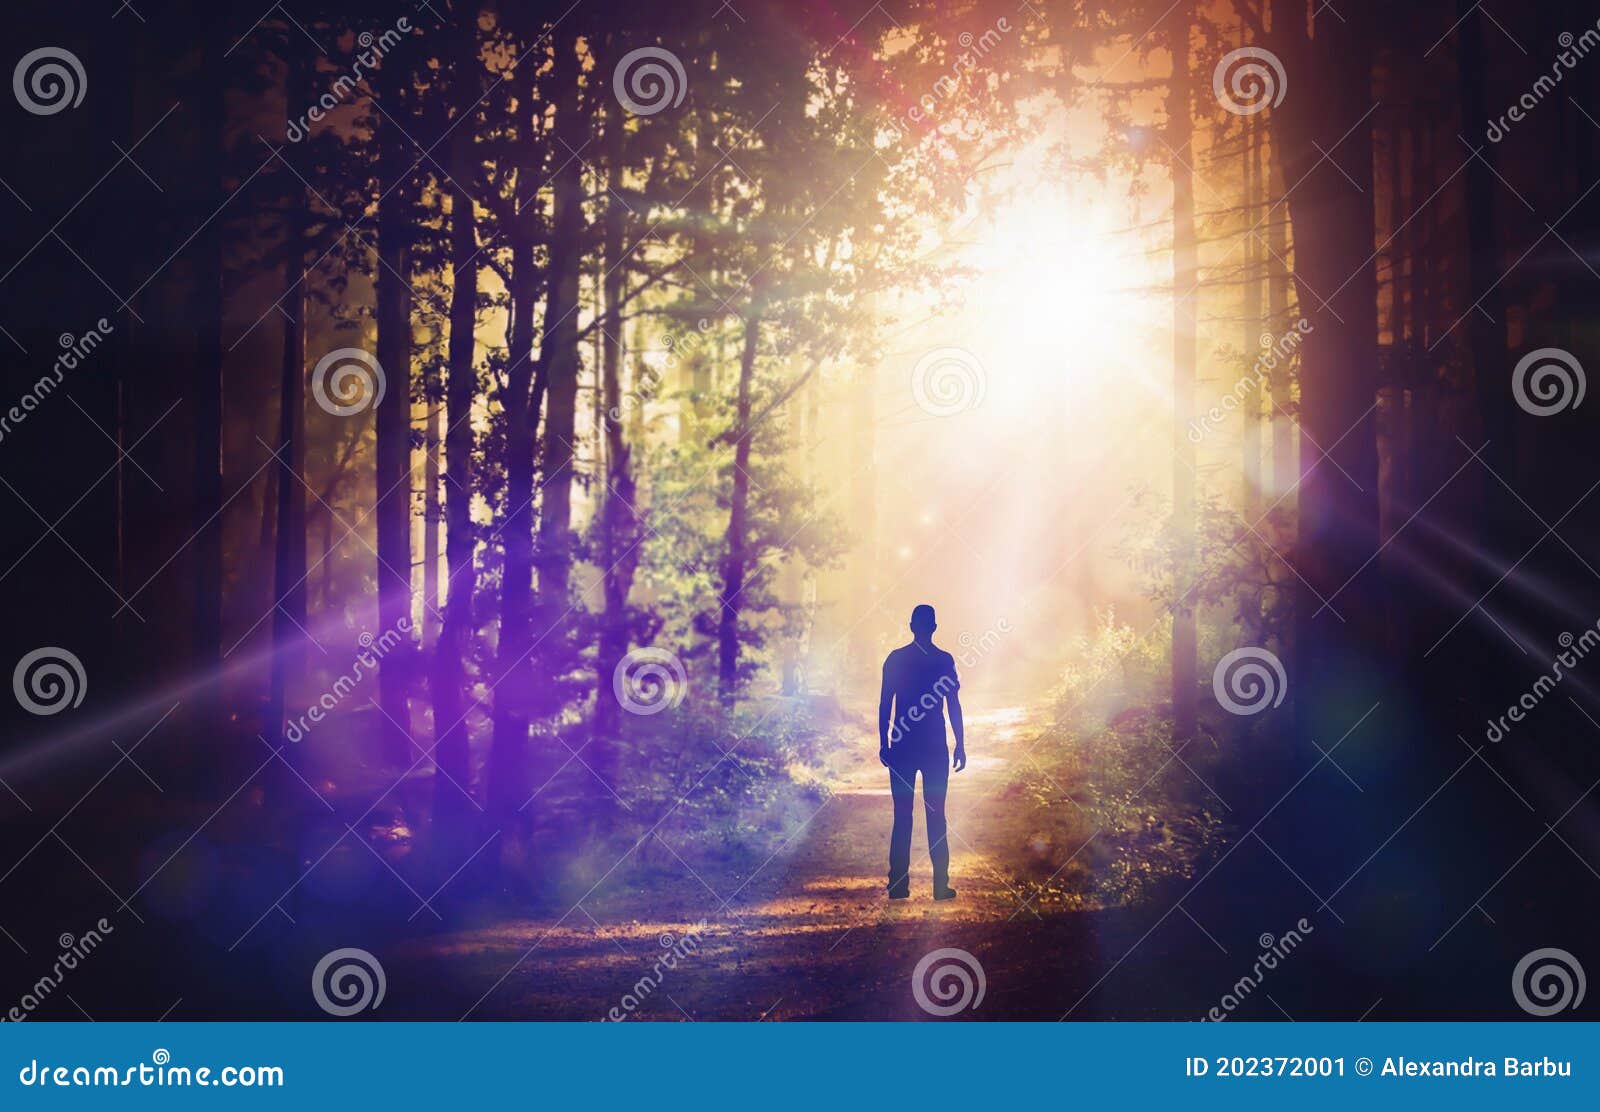 man silhouette walking up path towards the sun light magic forest